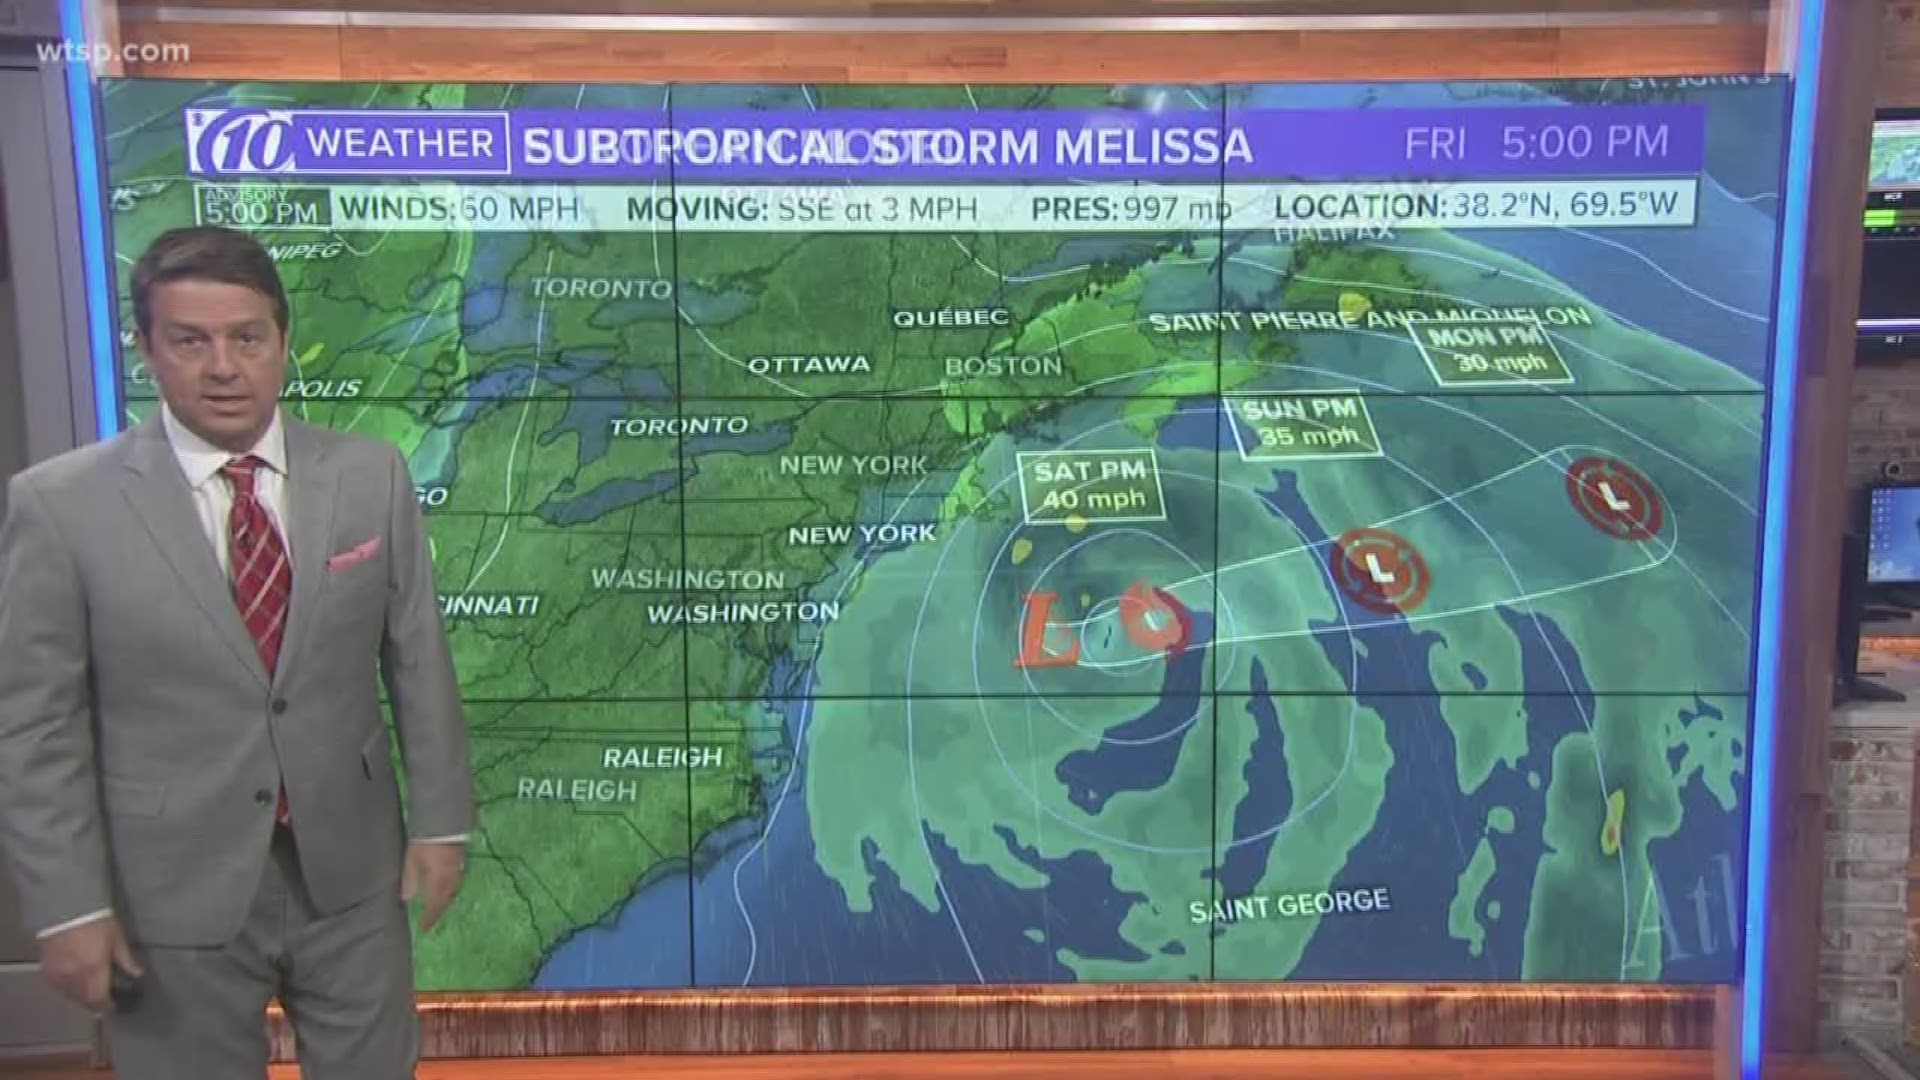 The National Hurricane Center says Melissa is currently about 190 miles south of Nantucket, Mass. It's packing 65 mph winds. https://bit.ly/33rCrVN